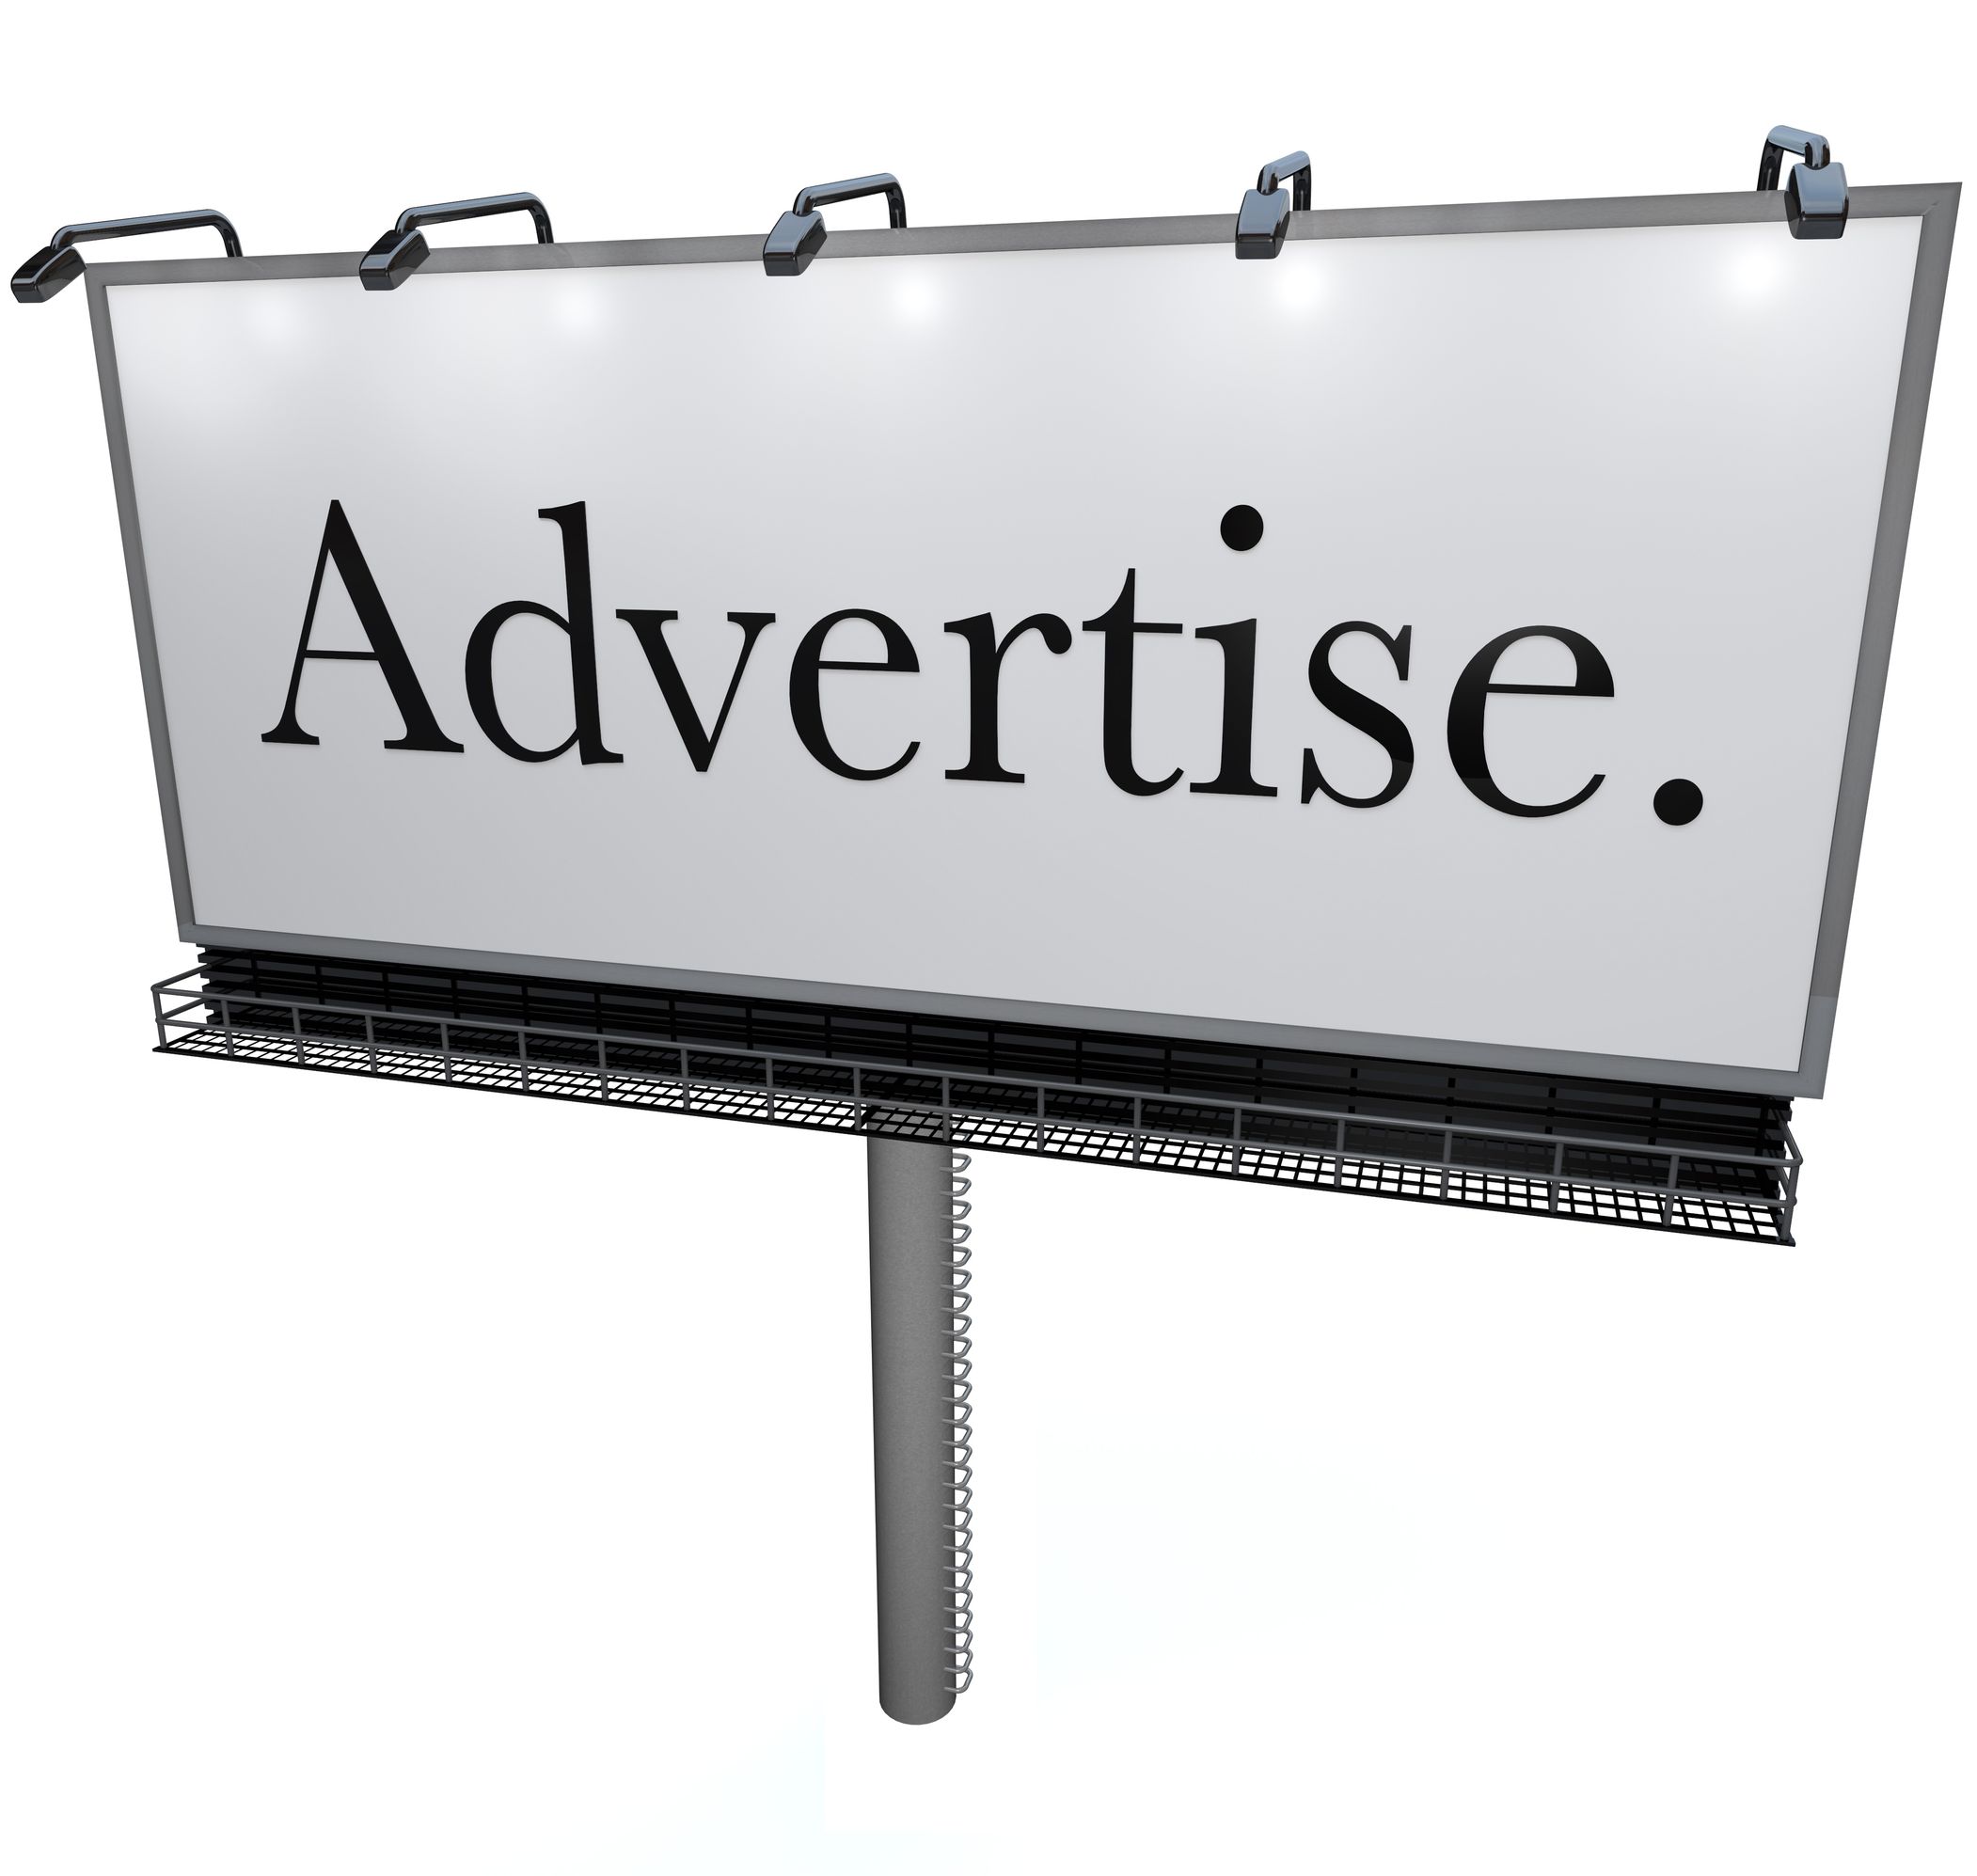 A Business in Texas Should Consider Outdoor Advertising